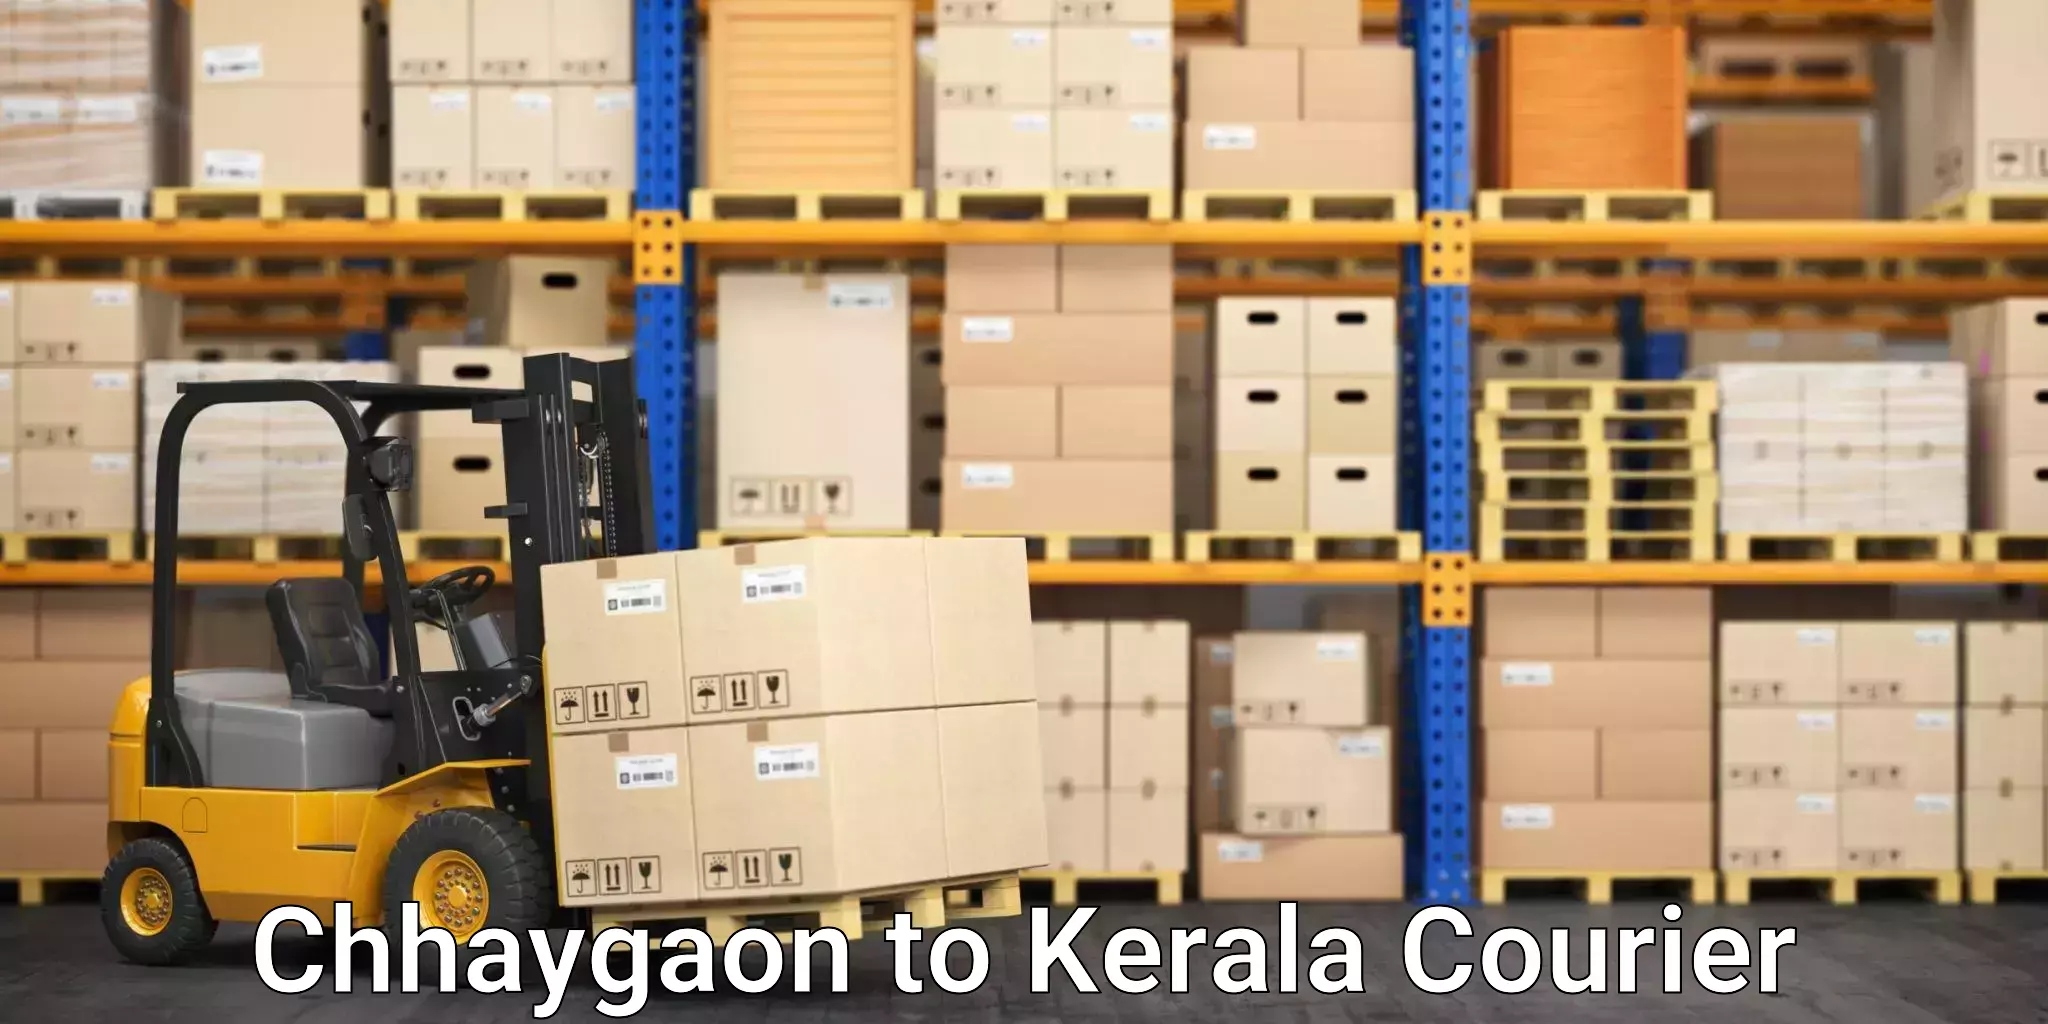 Urgent courier needs Chhaygaon to Kollam